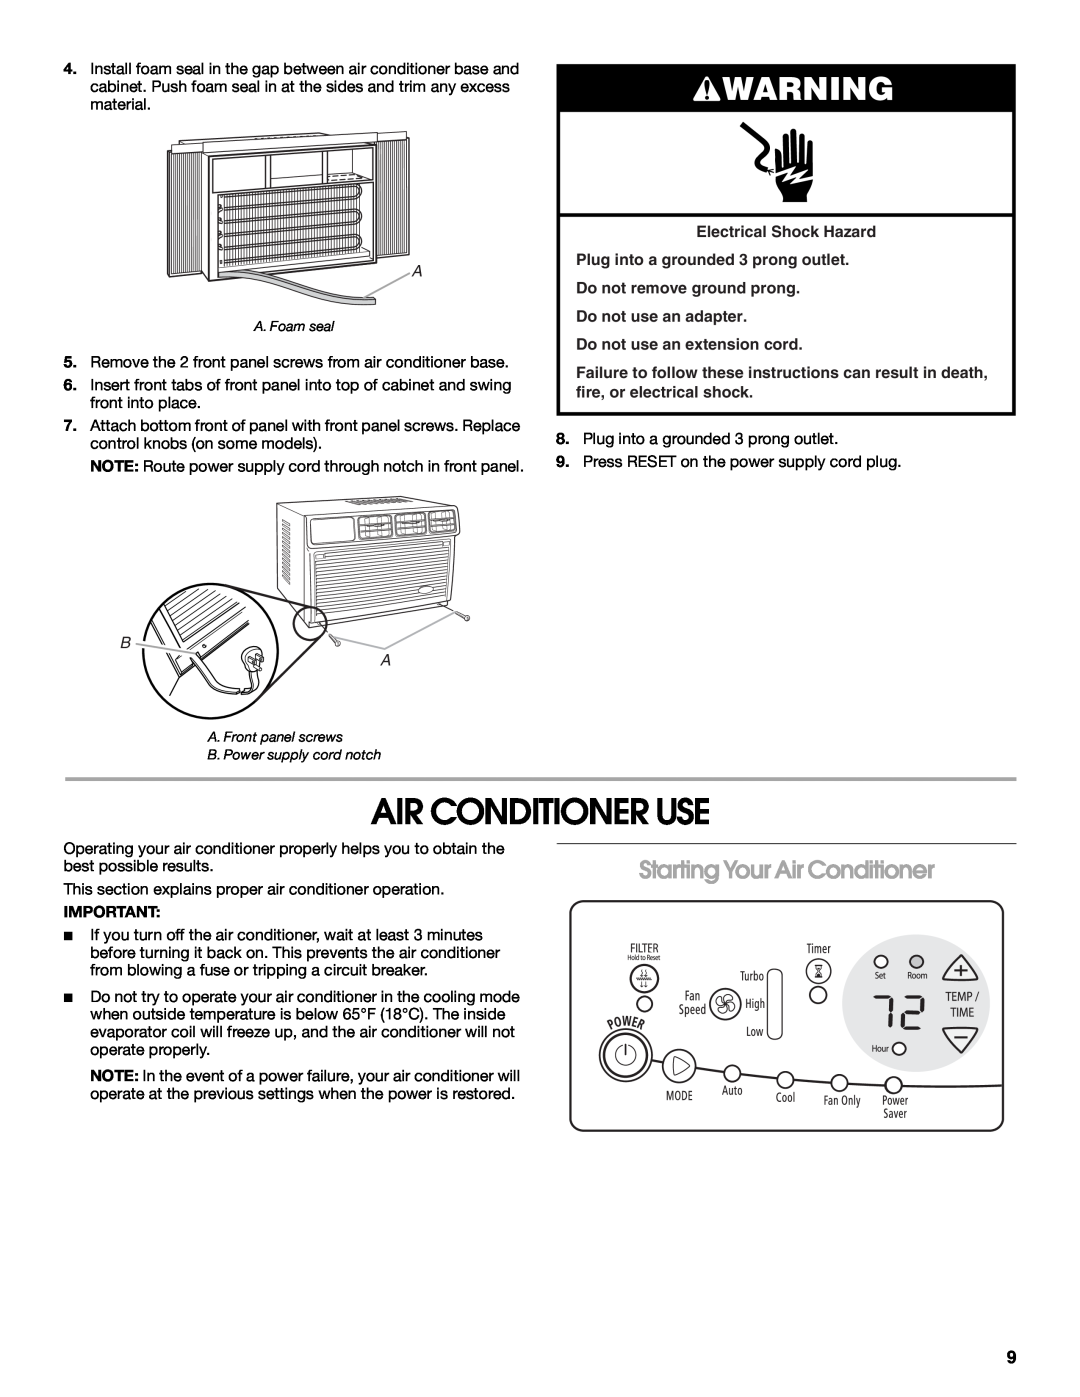 Whirlpool ACC082XR0 manual Air Conditioner Use, Starting Your Air Conditioner, Electrical Shock Hazard 